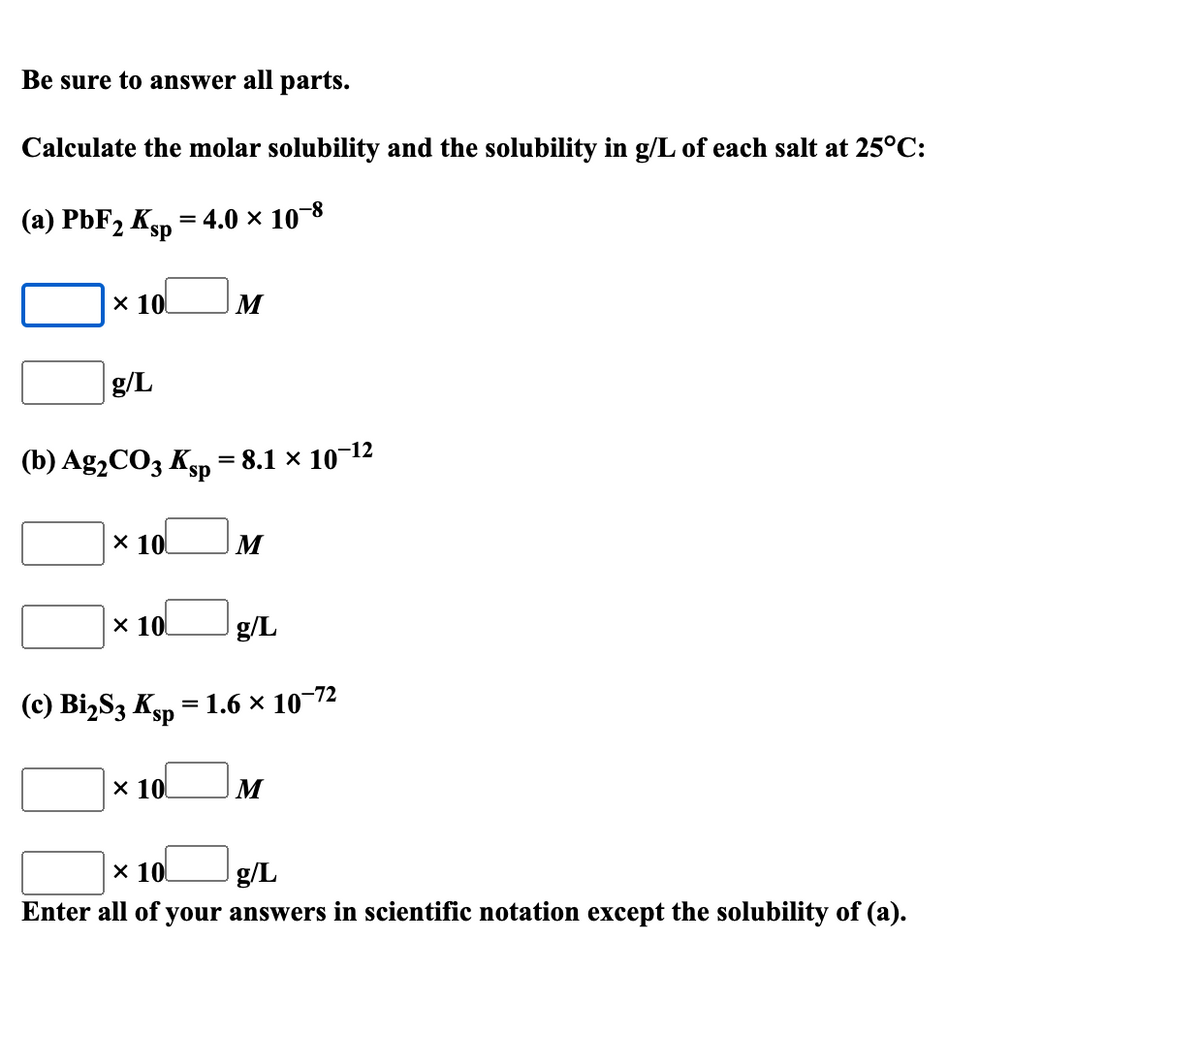 Be sure to answer all parts.
Calculate the molar solubility and the solubility in g/L of each salt at 25°C:
(a) PbF2 Ksp = 4.0 × 10-8
x 10
M
g/L
(b) Ag2CO3 Ksp -
= 8.1 x 10-12
X 10
M
х 10
g/L
(c) BizS3 Ksp °
1.6 x 10-72
%D
х 10
х 101
g/L
Enter all of your answers in scientific notation except the solubility of (a).
